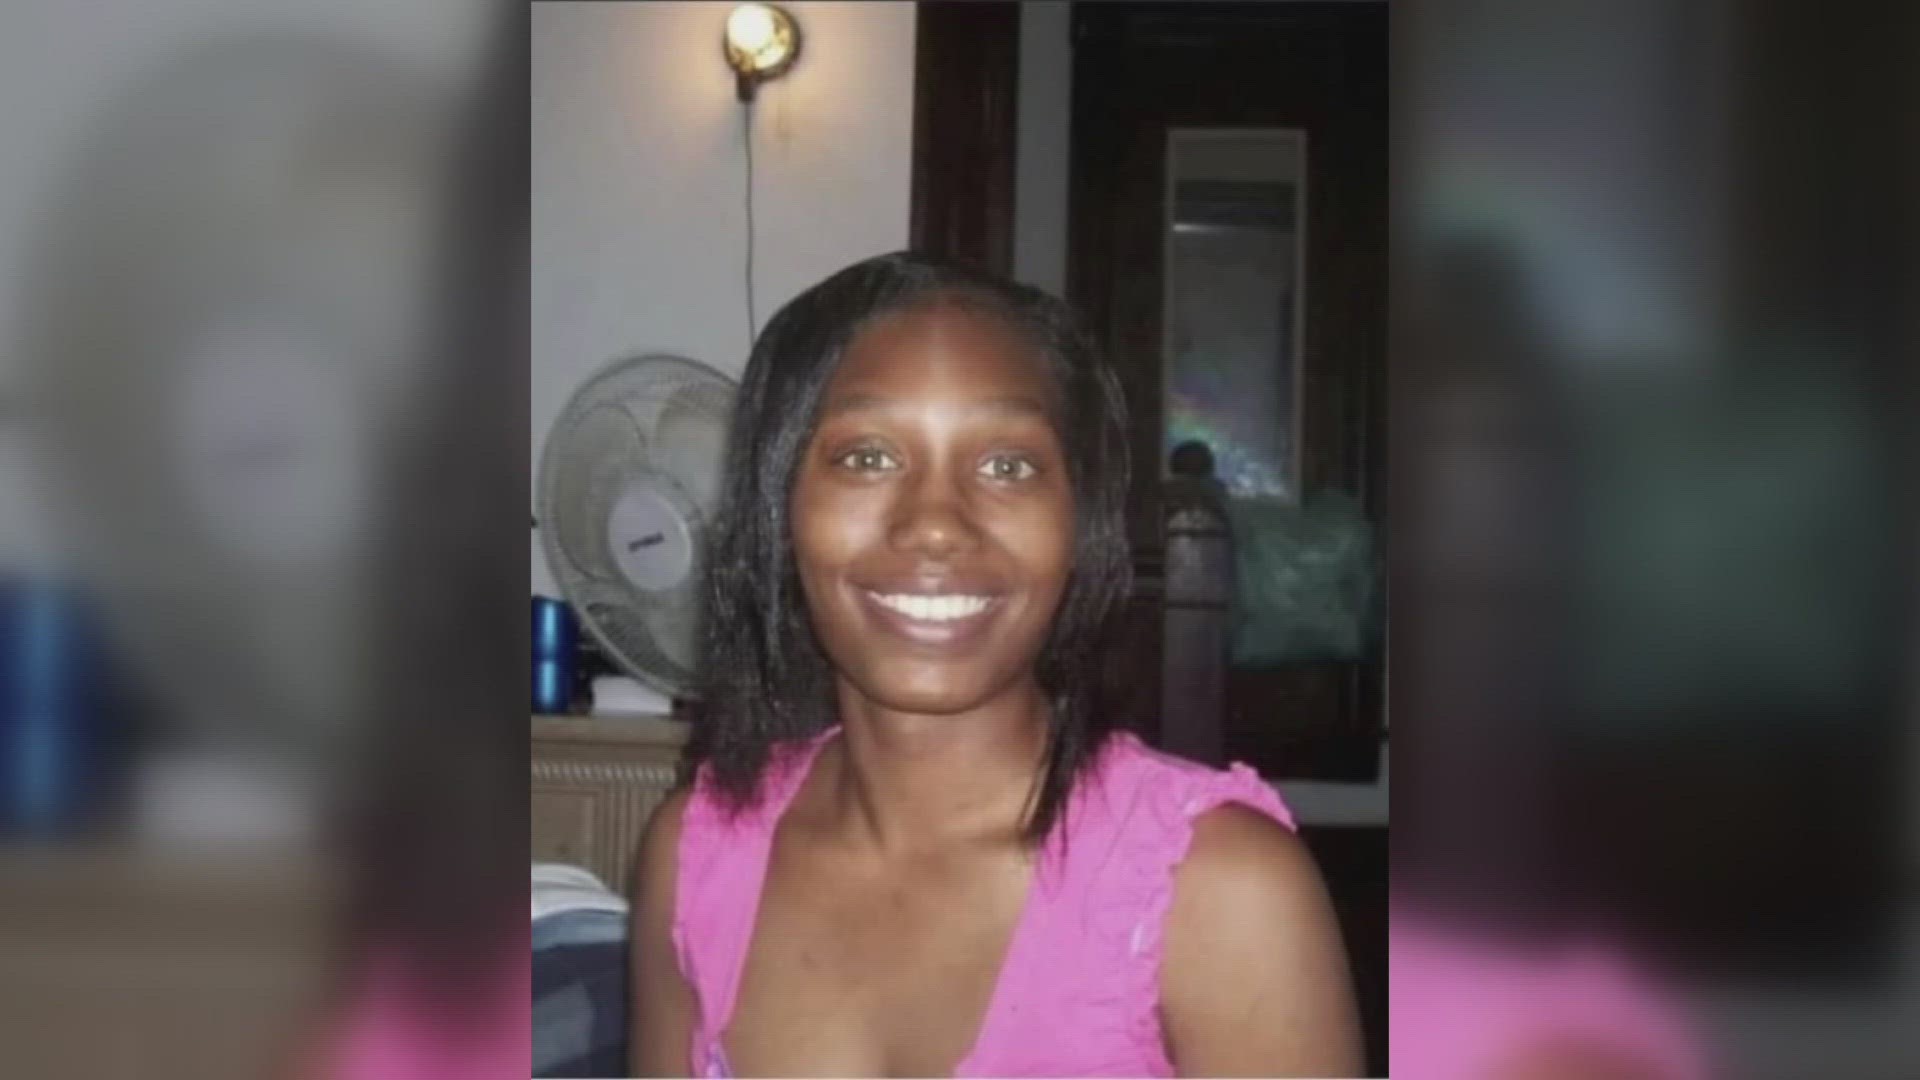 The family of LaToya Carpenter is still seeking justice, three years after the 39-year-old Columbus woman was shot and killed while driving.